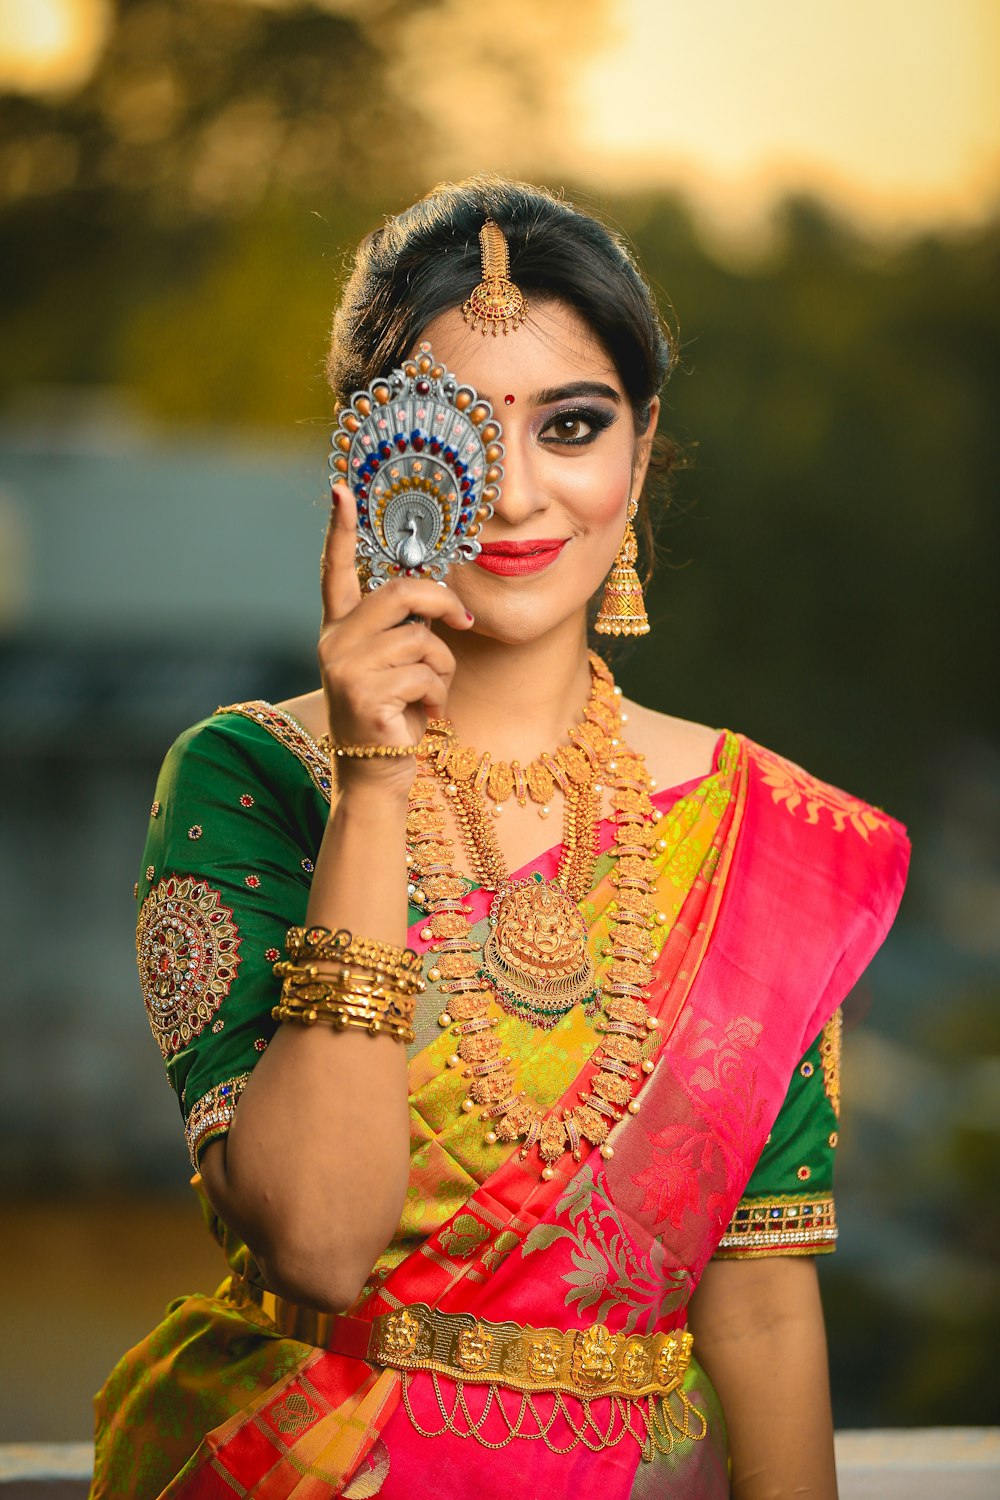 woman in green, gold, and red sari dress hiding her right eye while smiling